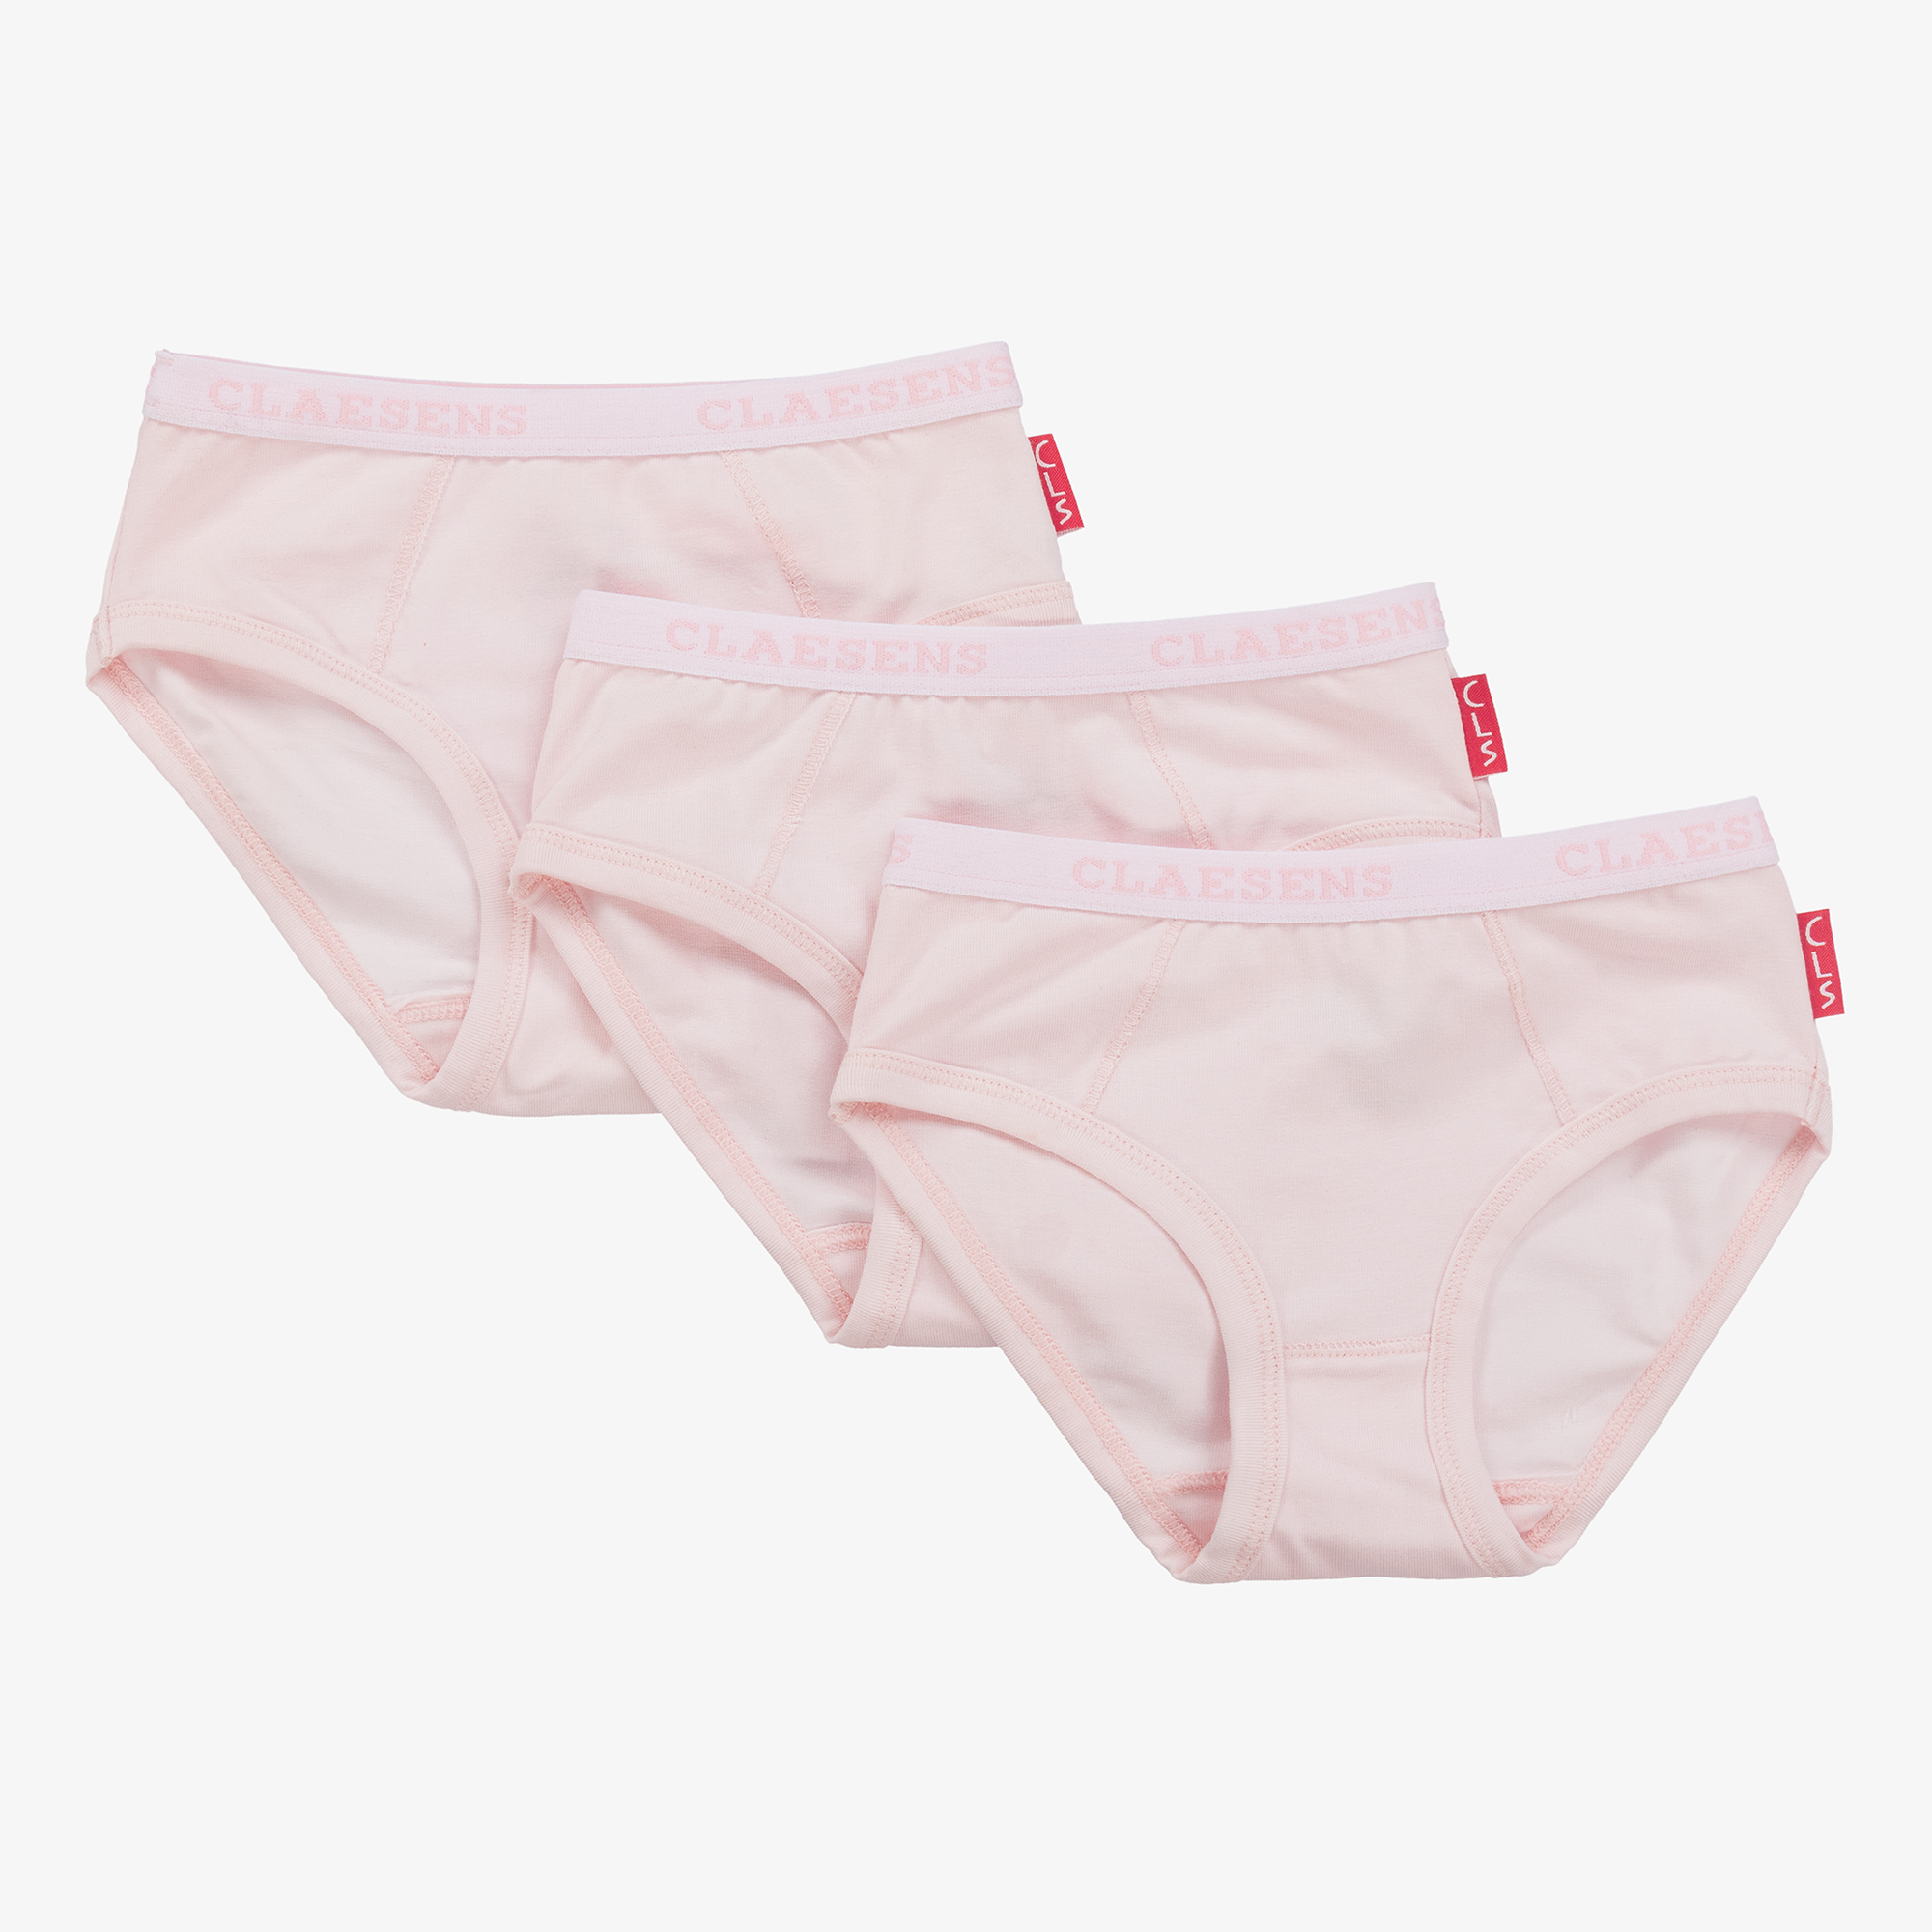 Old English rose 100%cotton knickers — Buttress & Snatch